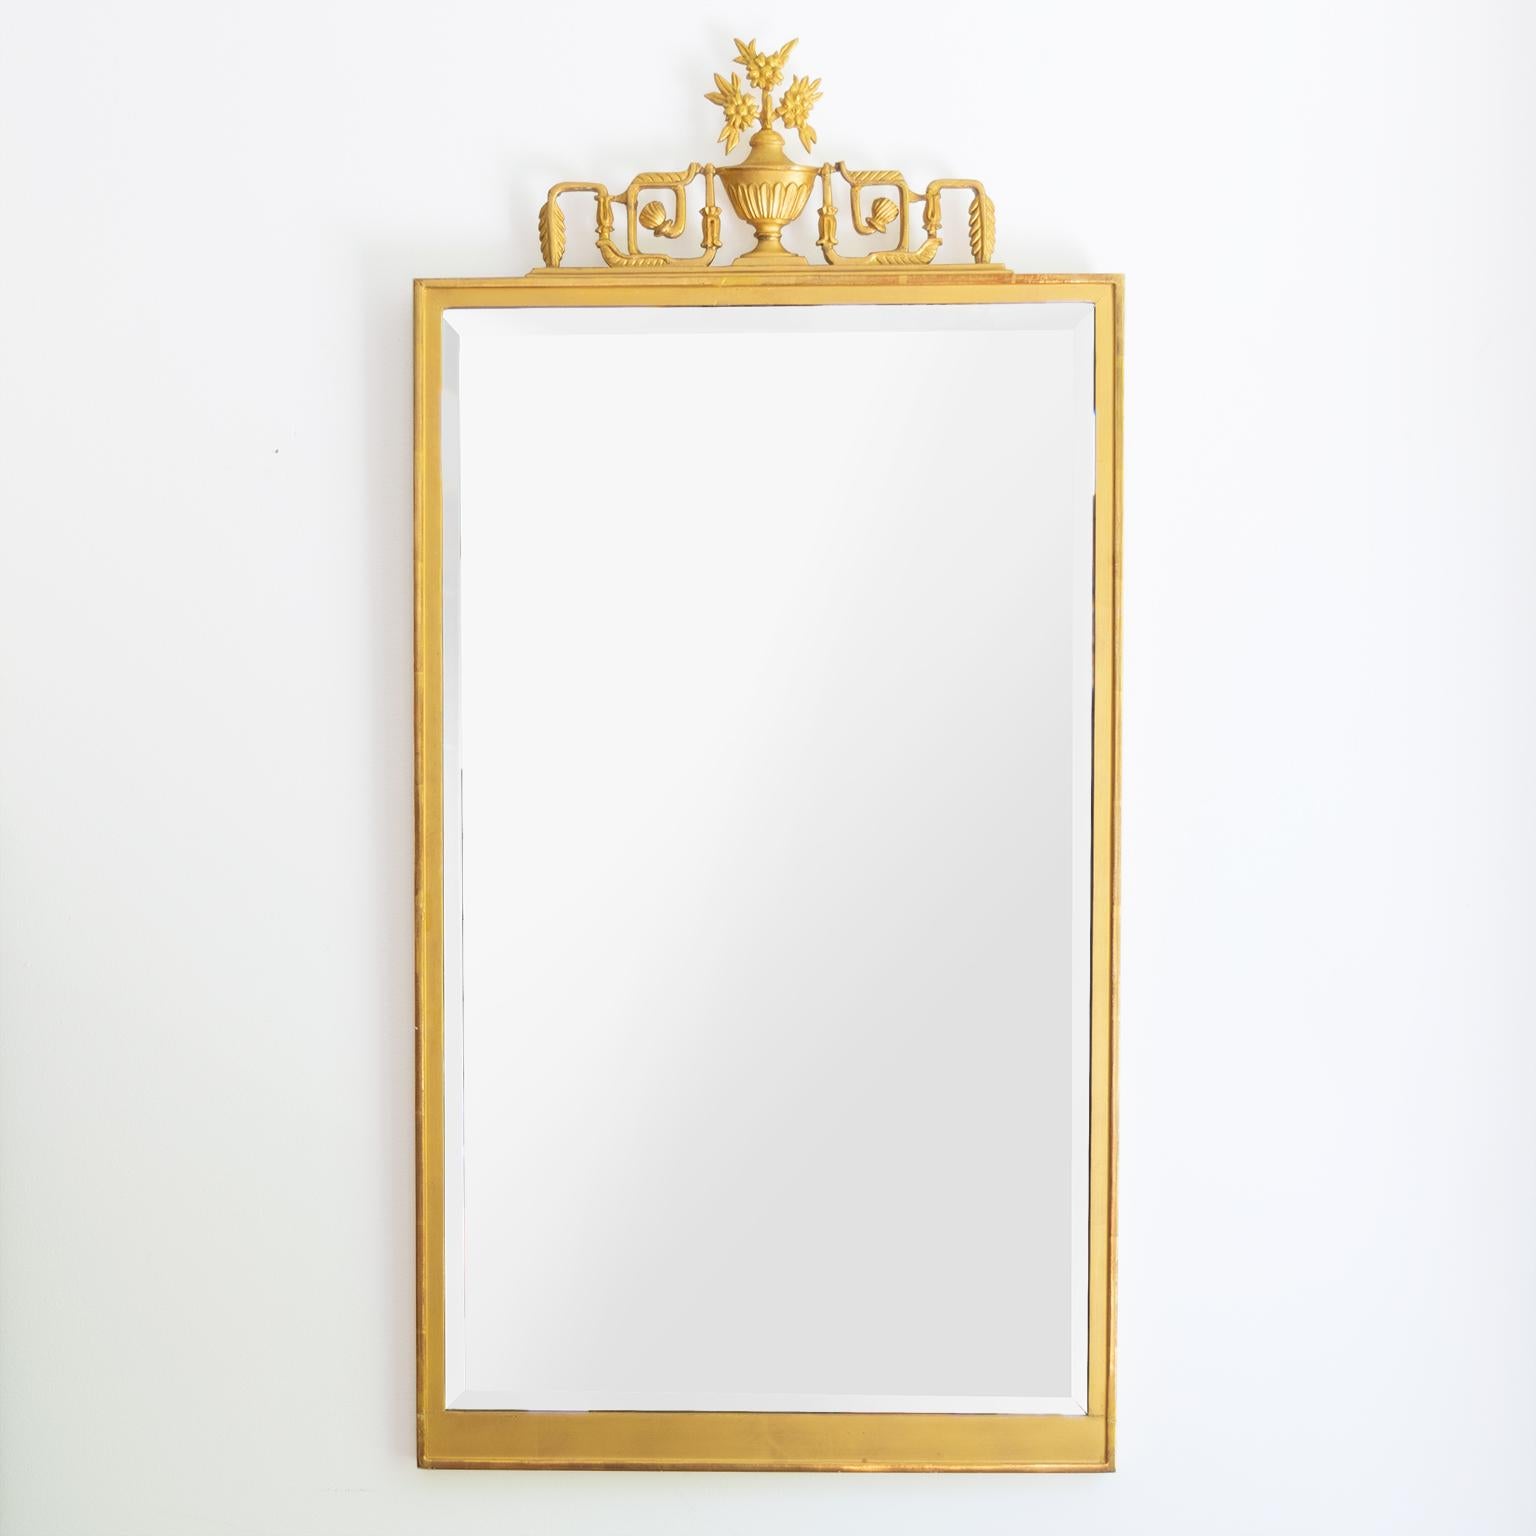 Swedish Grace, Art Deco giltwood mirror with decorative carving depicting a neoclassical urn flanked by a vine in a Meander motif. The mirror retains if original beveled mirror glass resting in a rectangular frame.